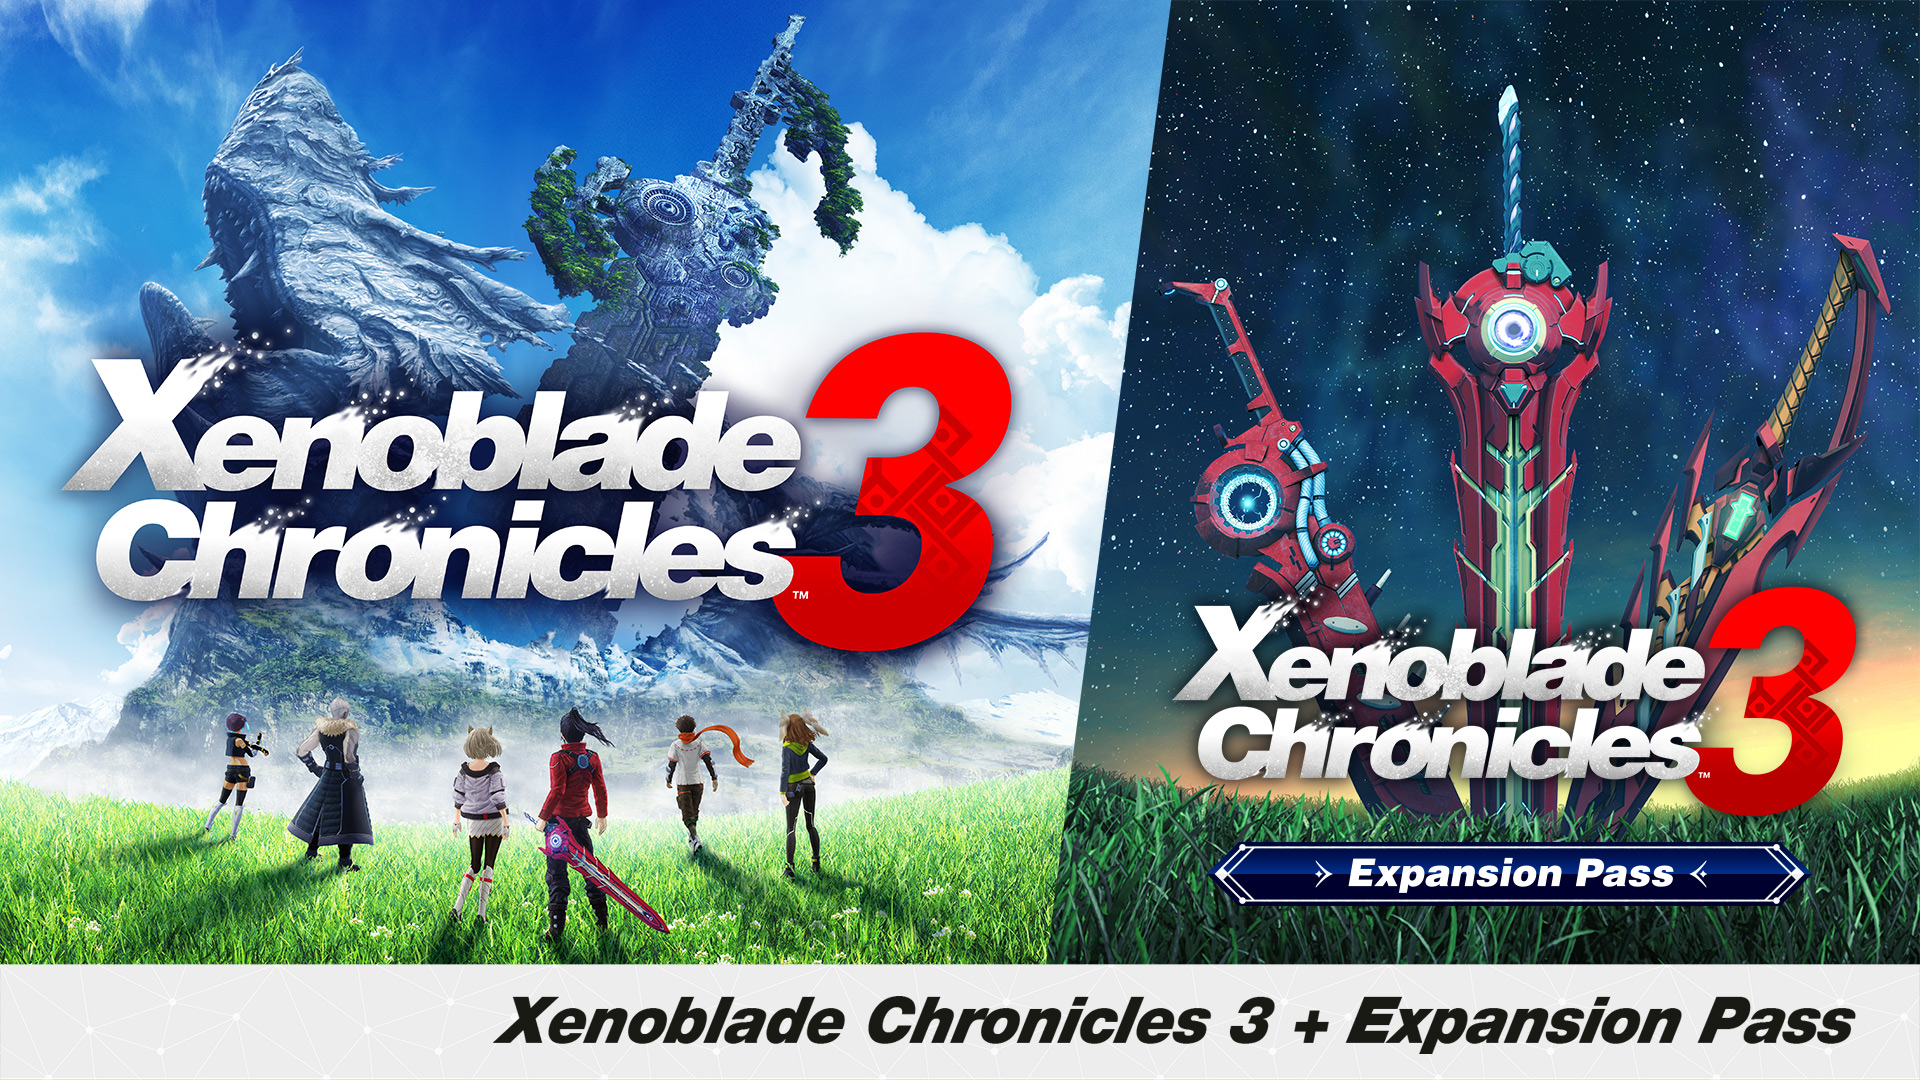 Xenoblade Chronicles 3 + Expansion Pass